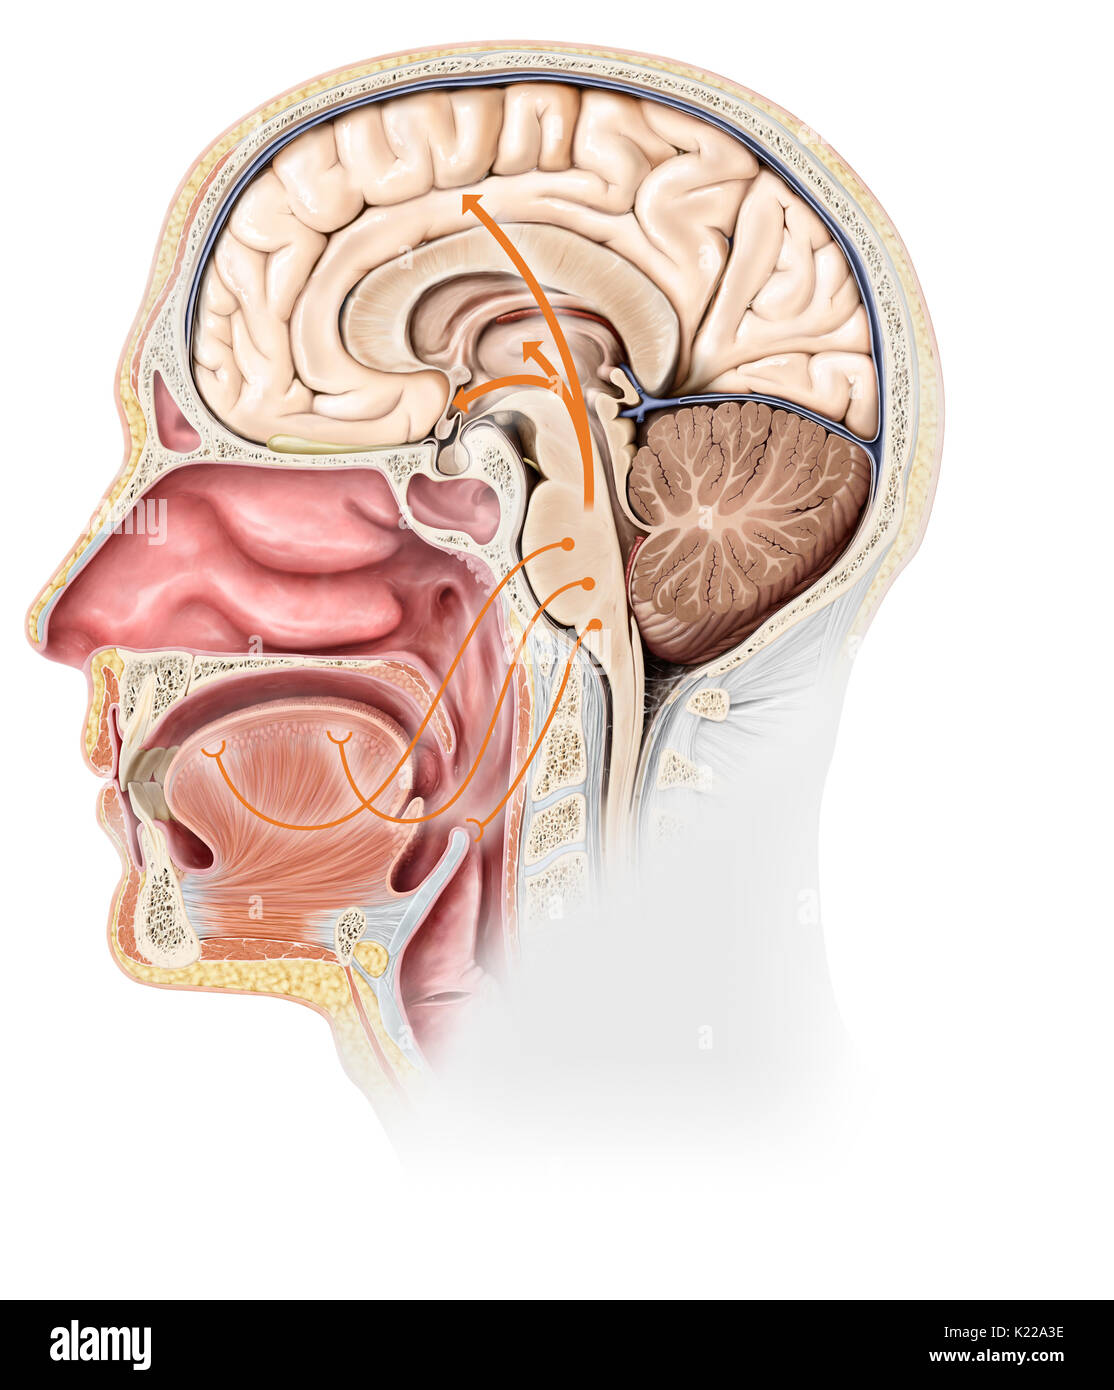 When a taste bud comes into contact with a sapid substance (that has a flavor) dissolved in the saliva, the cells that form the bud generate nerve signals. Sensory nerves route these to the cerebral cortex, where the conscious perception of flavor occurs. Stock Photo